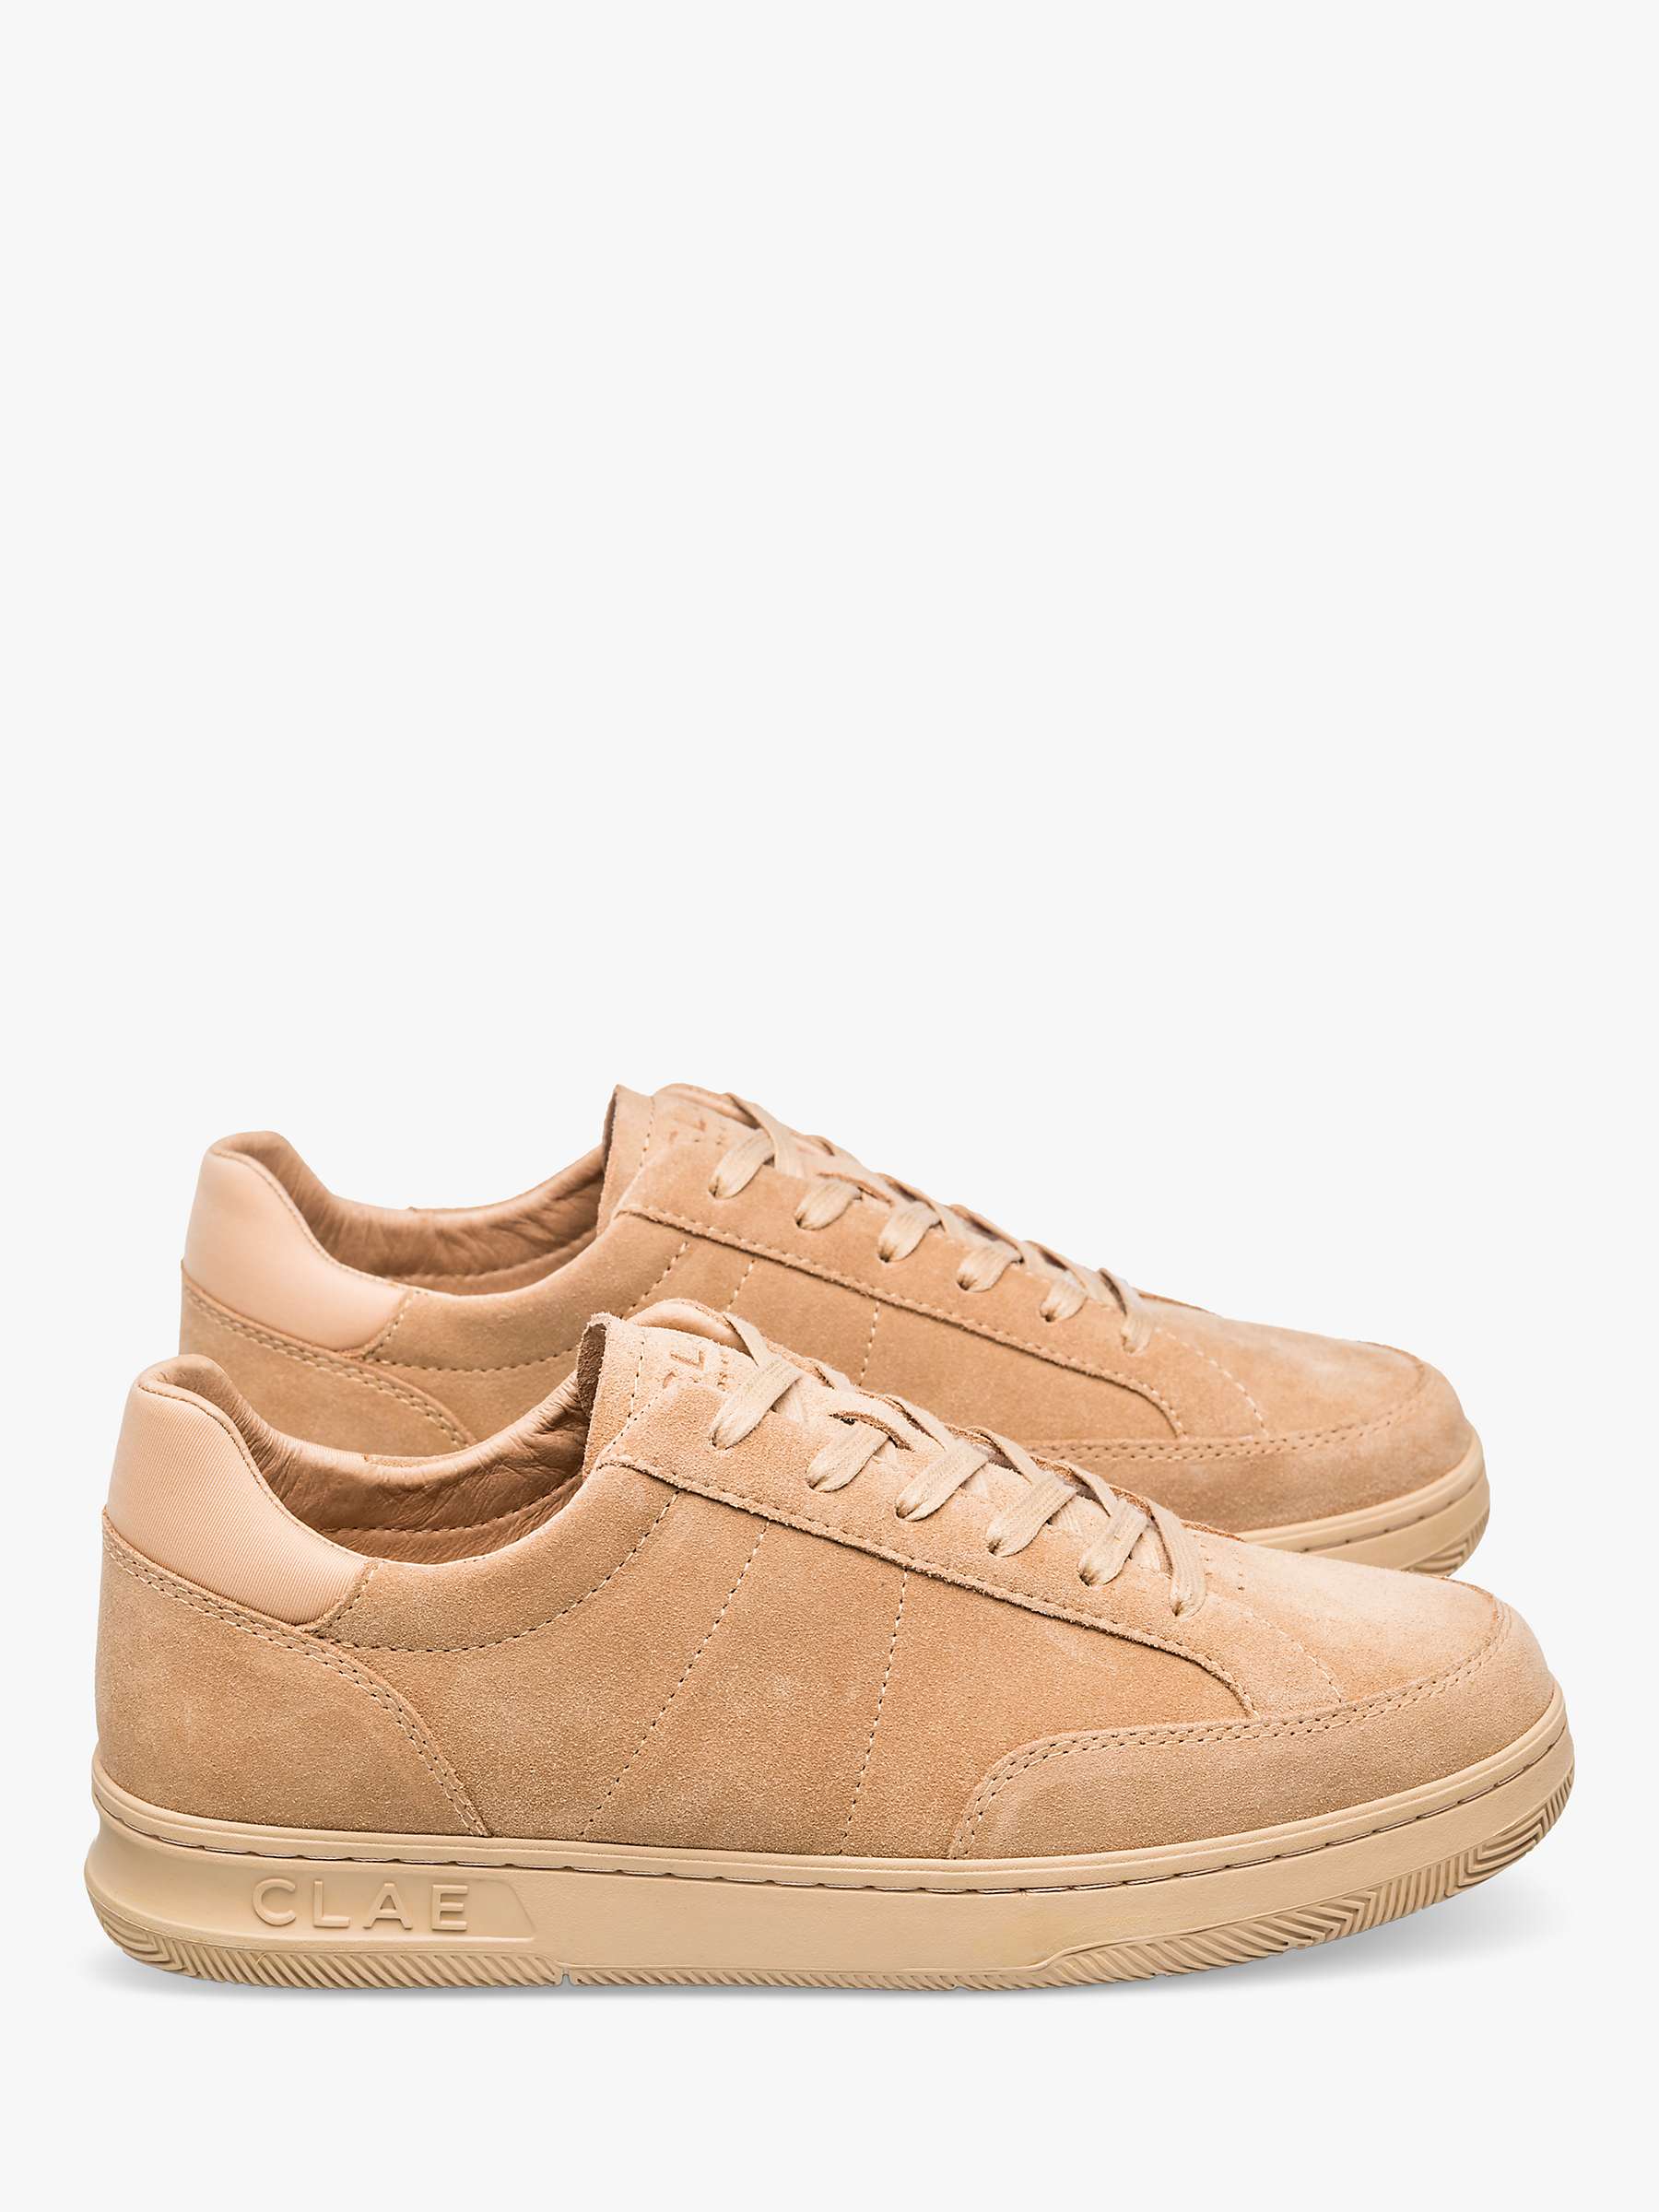 Buy CLAE Monroe Suede Lace Up Trainers, Starfish Online at johnlewis.com